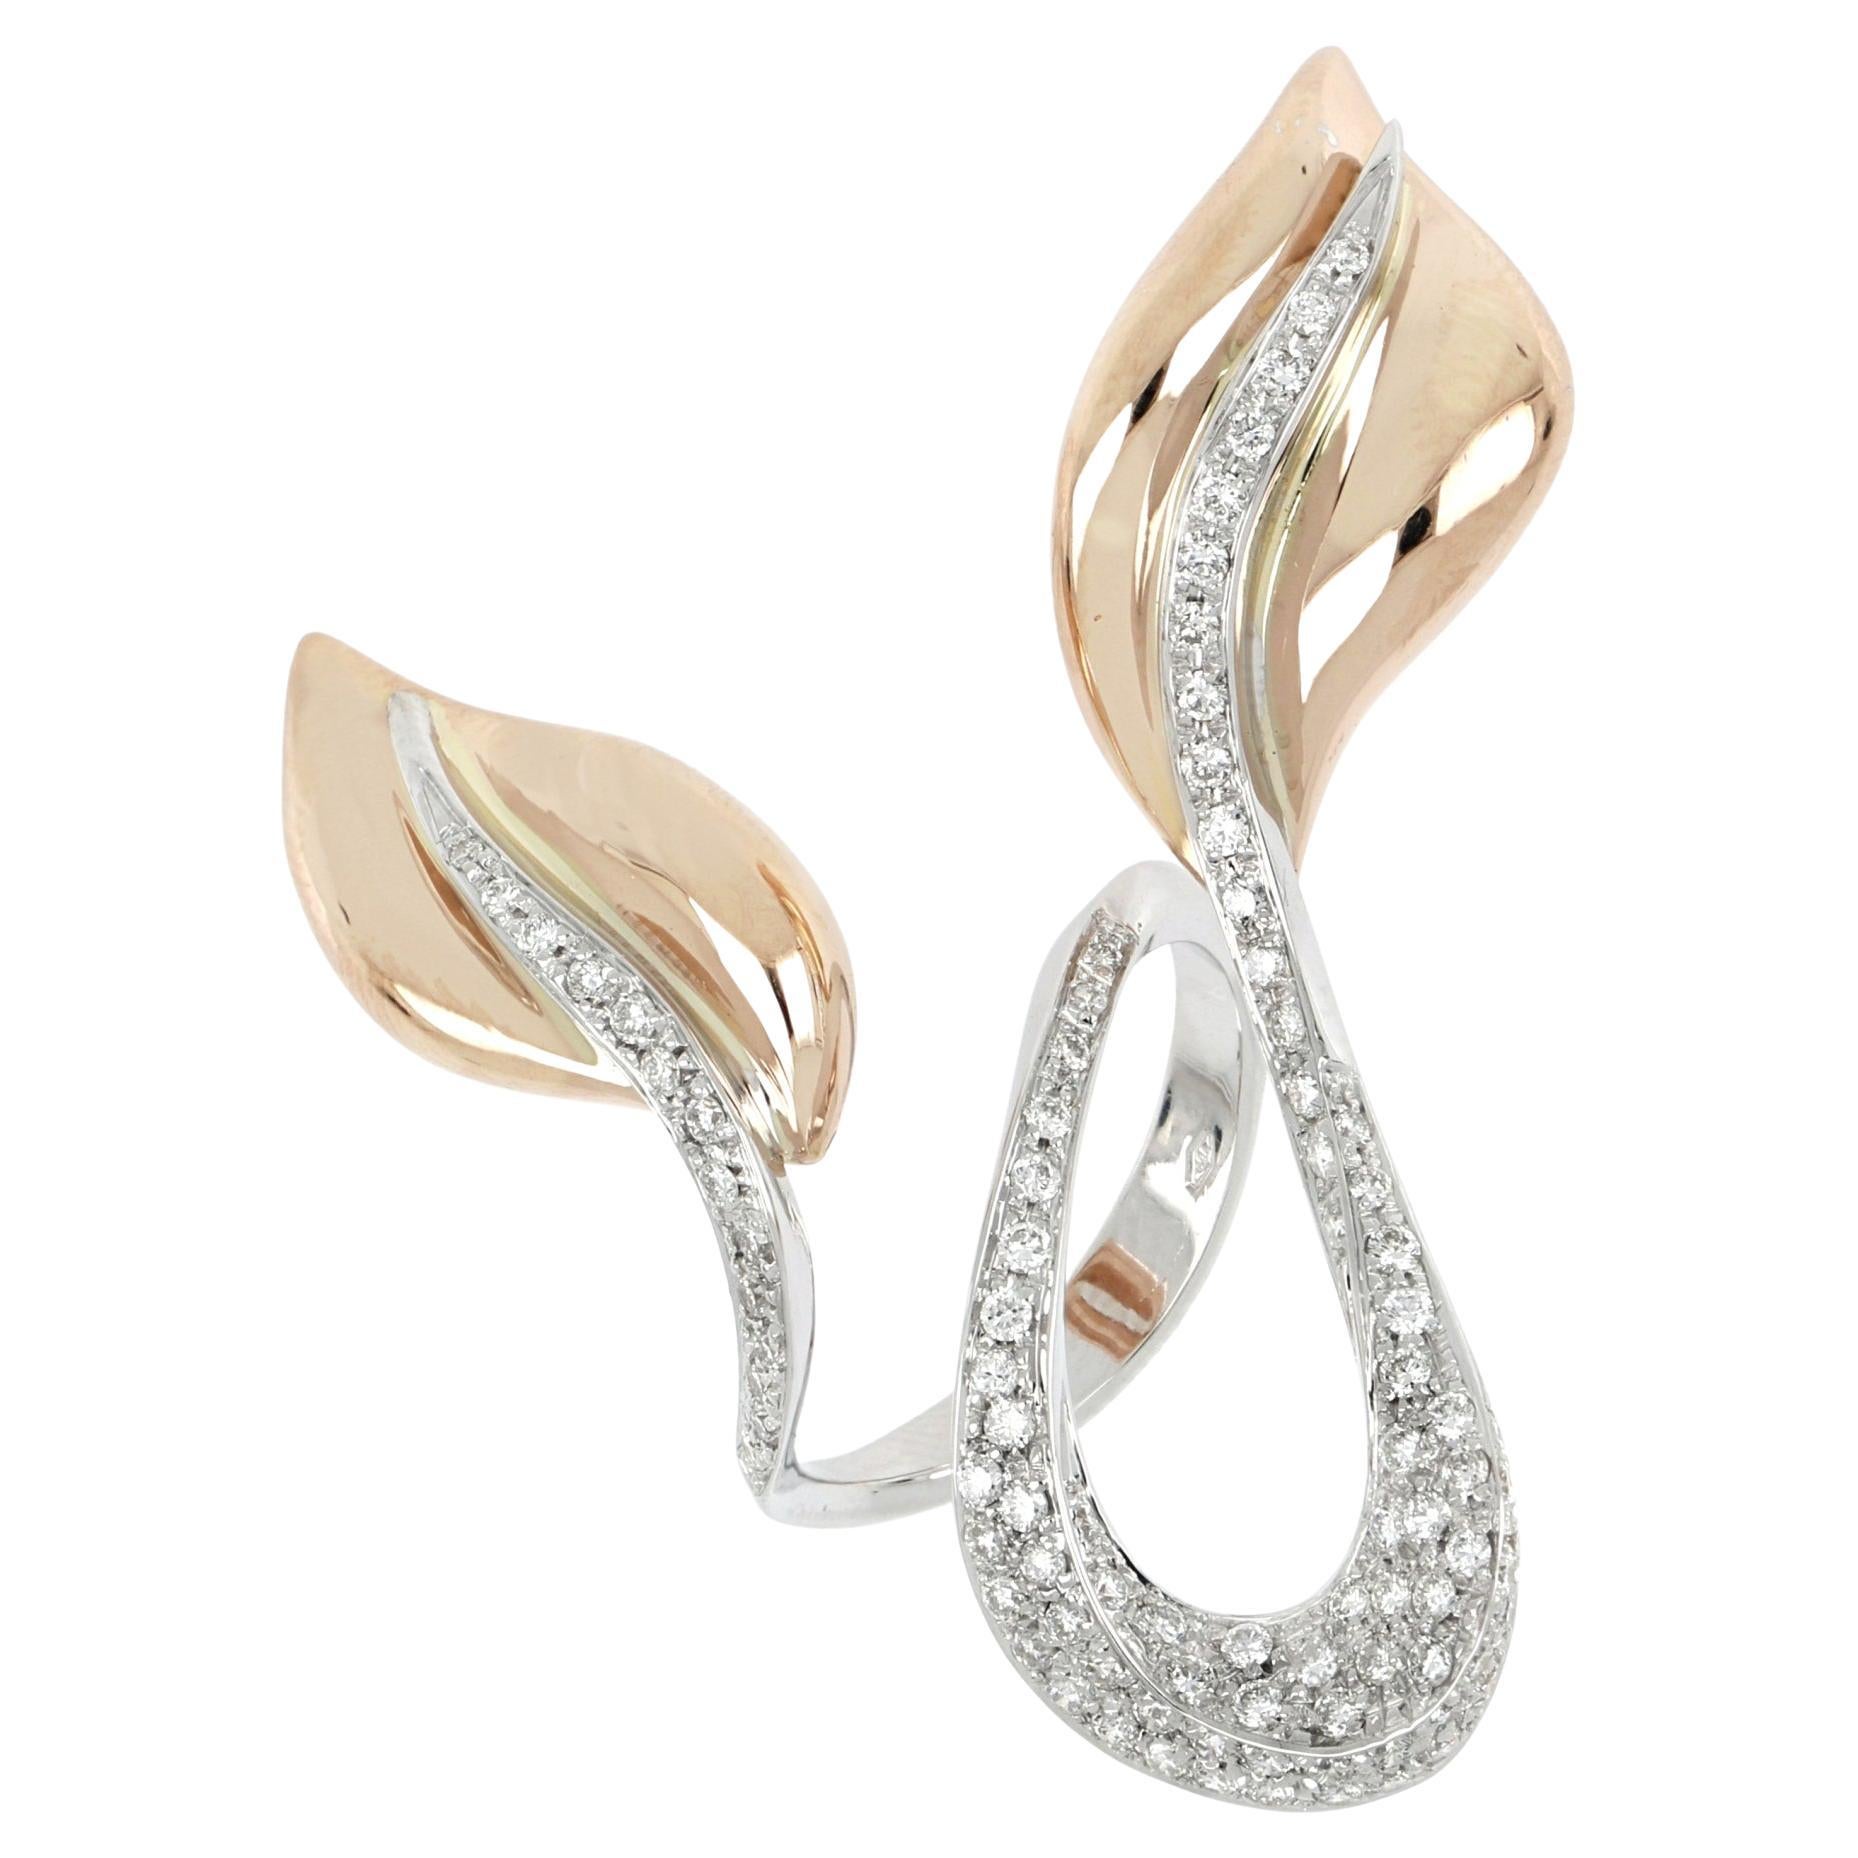 For Sale:  18kt White and Rose Gold 3 Chic Big Leaf Ring Enriched with Diamonds Pavè